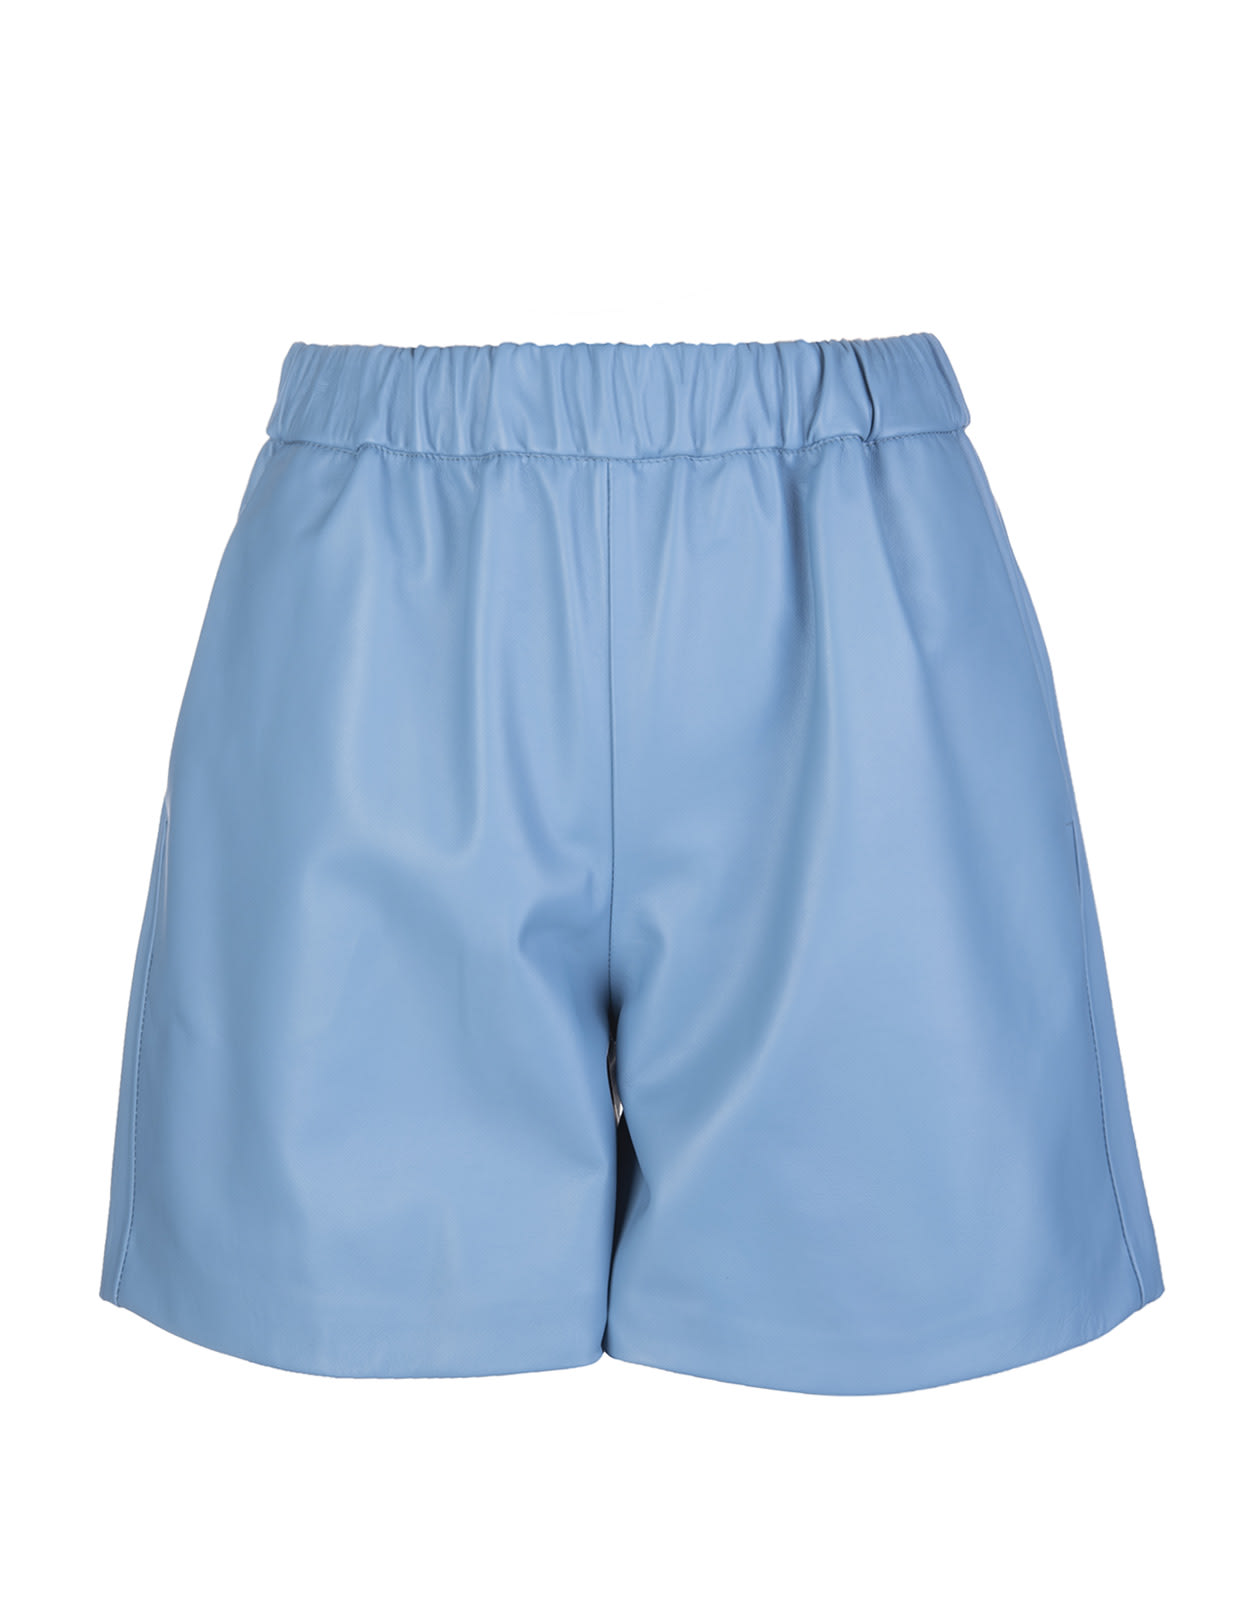 RED Valentino High Waisted Shorts In Light Blue Leather